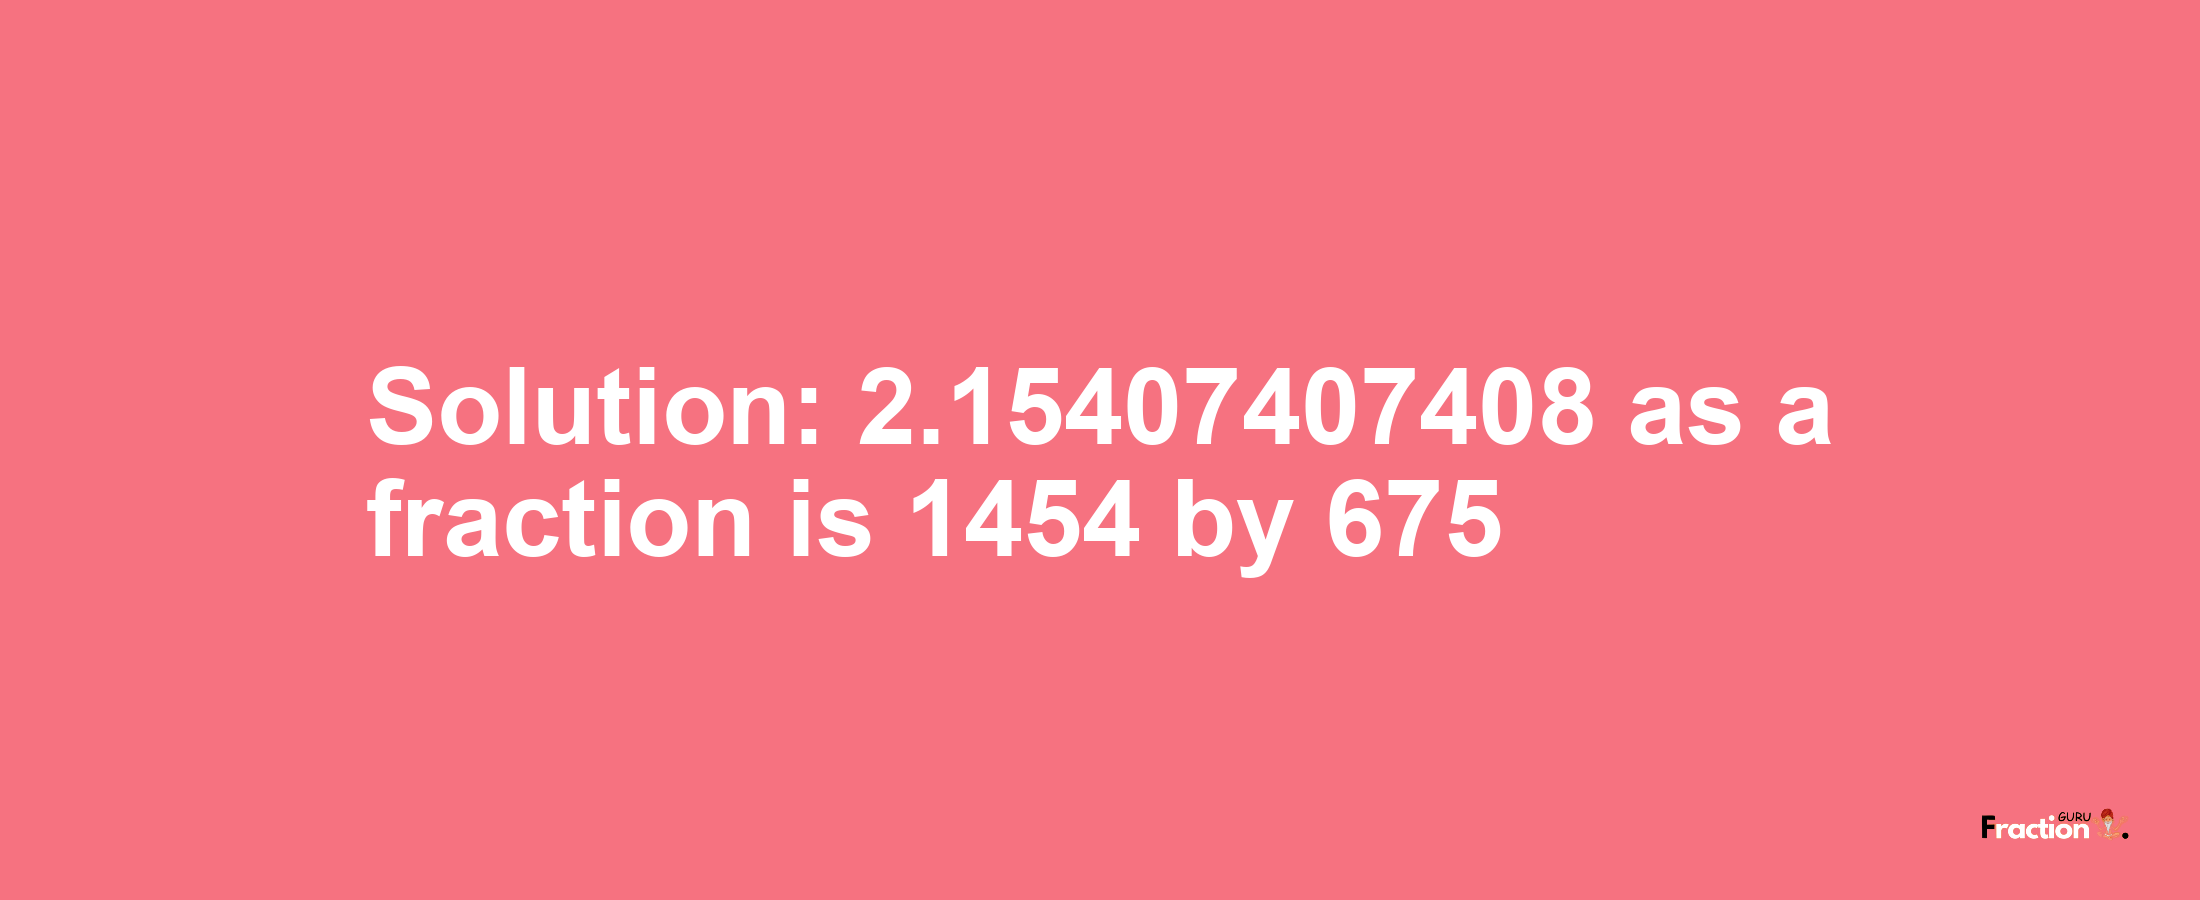 Solution:2.15407407408 as a fraction is 1454/675